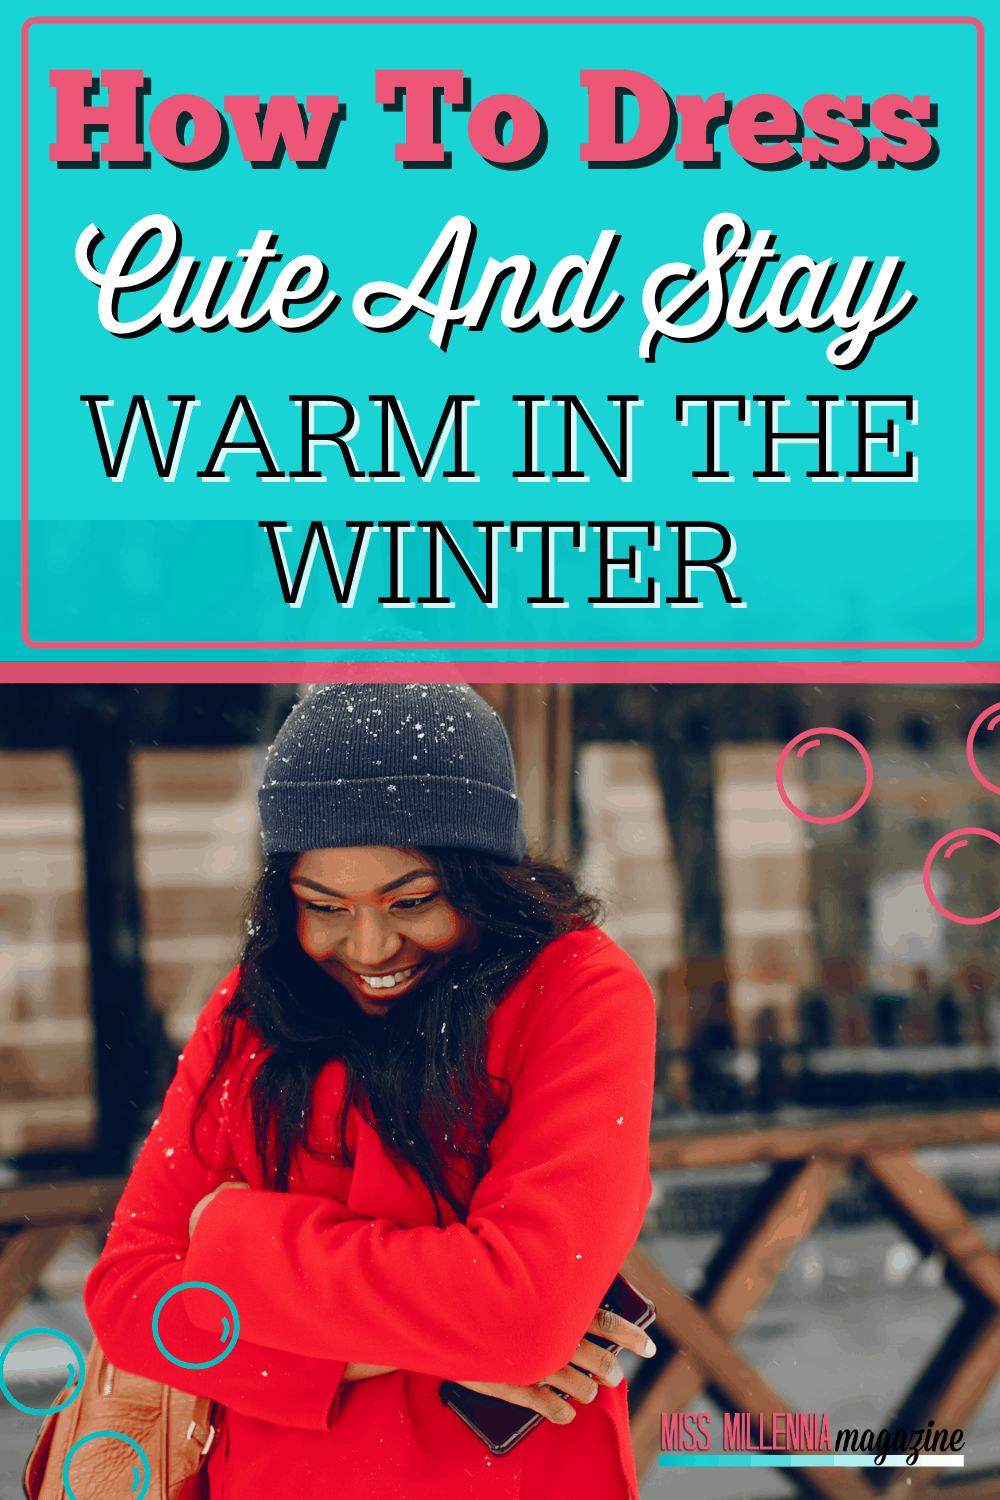 How To Dress Cute And Stay Warm In The Winter